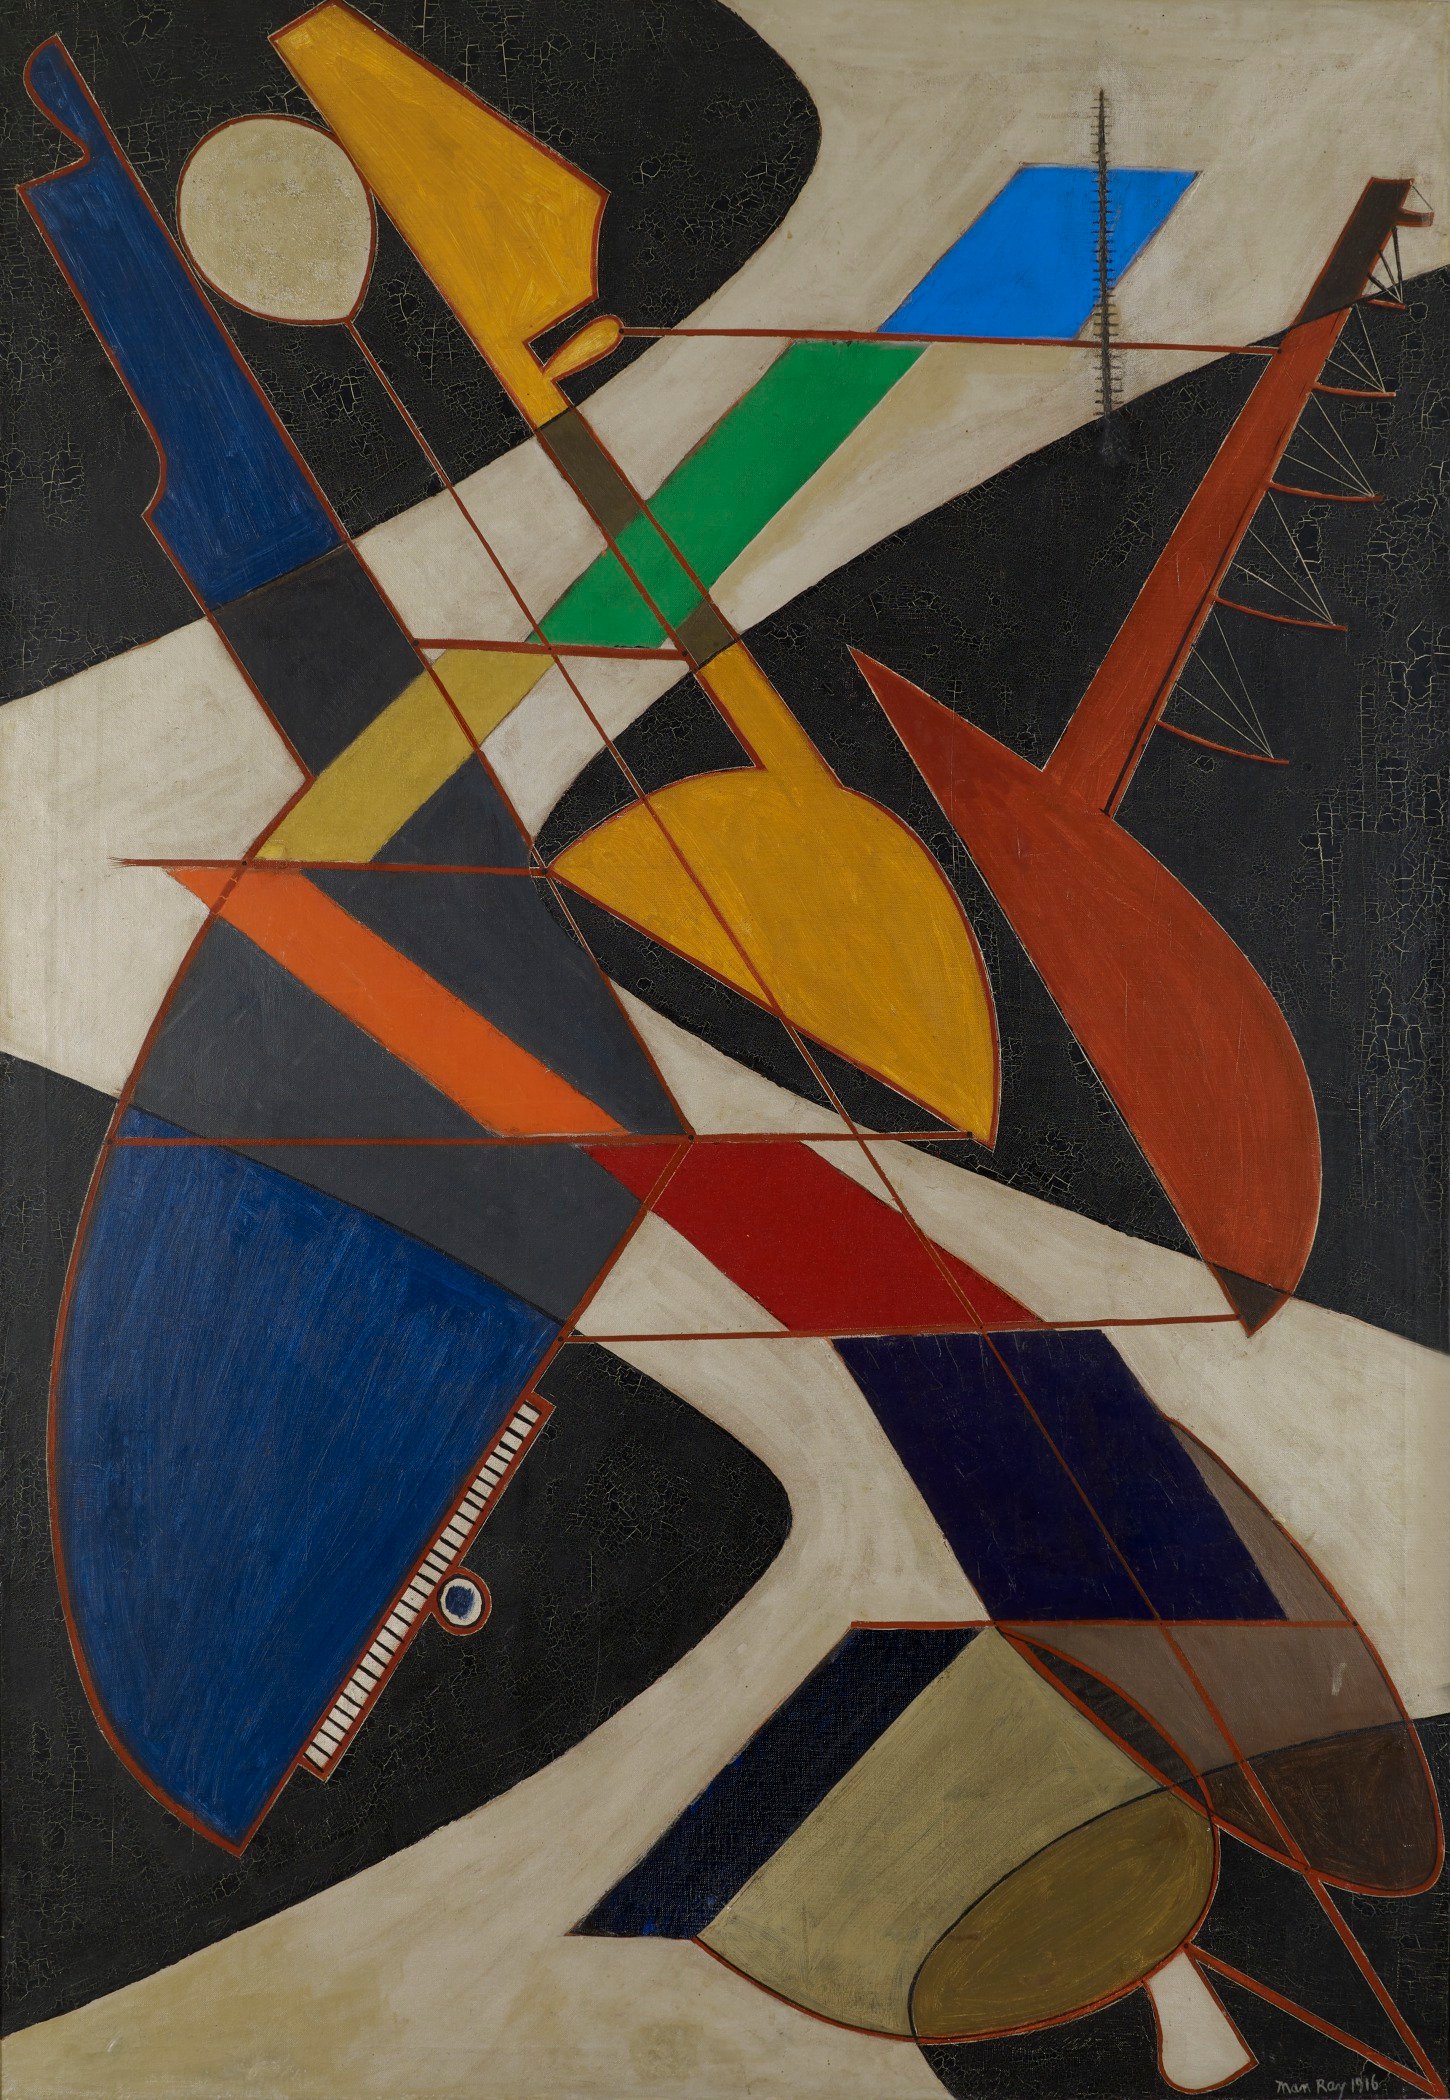 "Symphony Orchestra" by Man Ray, 1916, an abstract painting with an 'S' or compound curve composition featuring intersecting geometric shapes and curved forms in a rhythmic arrangement on a dark background.